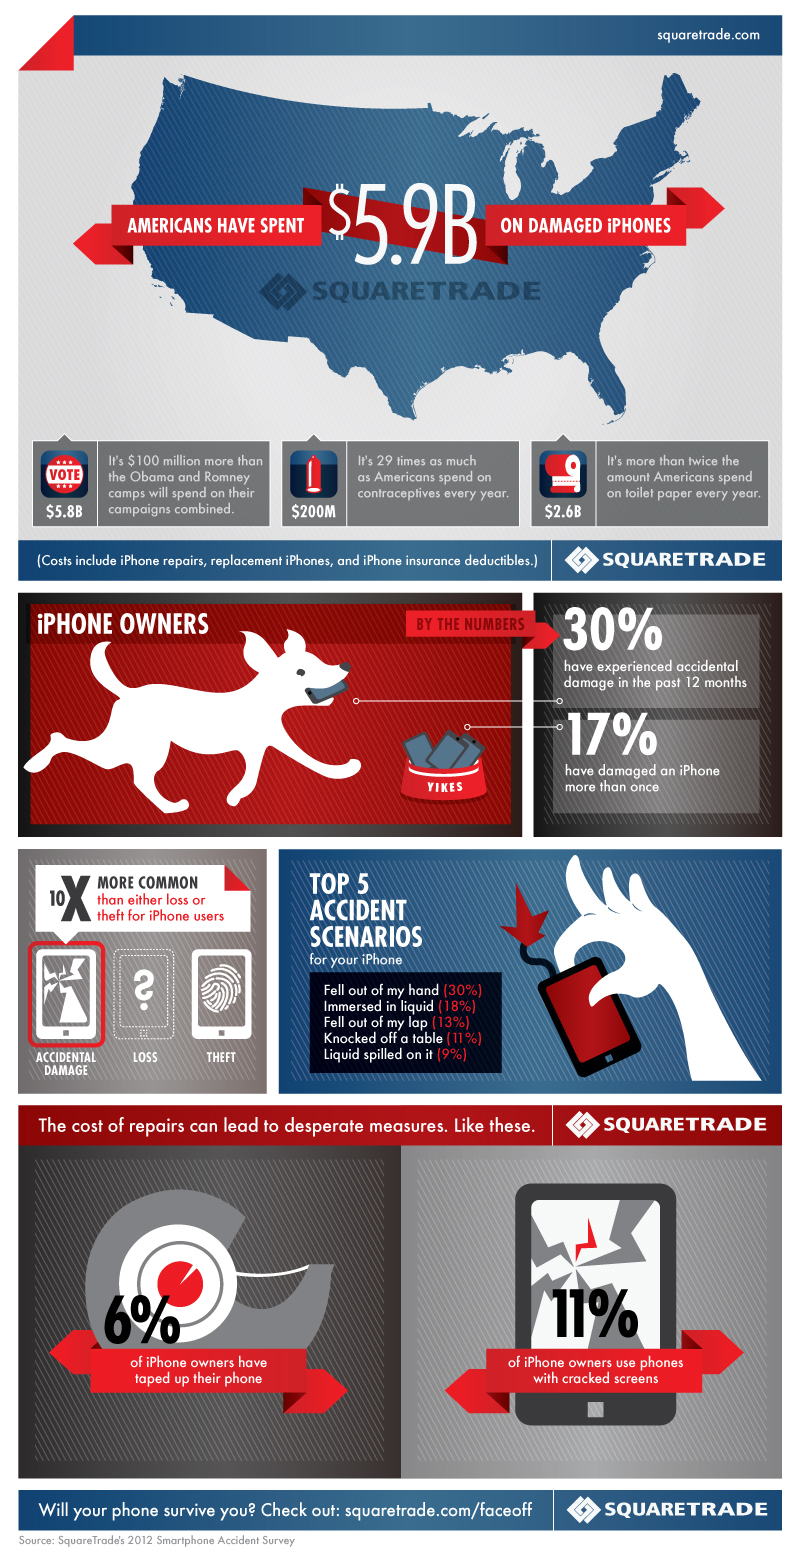 Americans Have Spent $5.9 Billion on Damaged iPhones [Infographic]